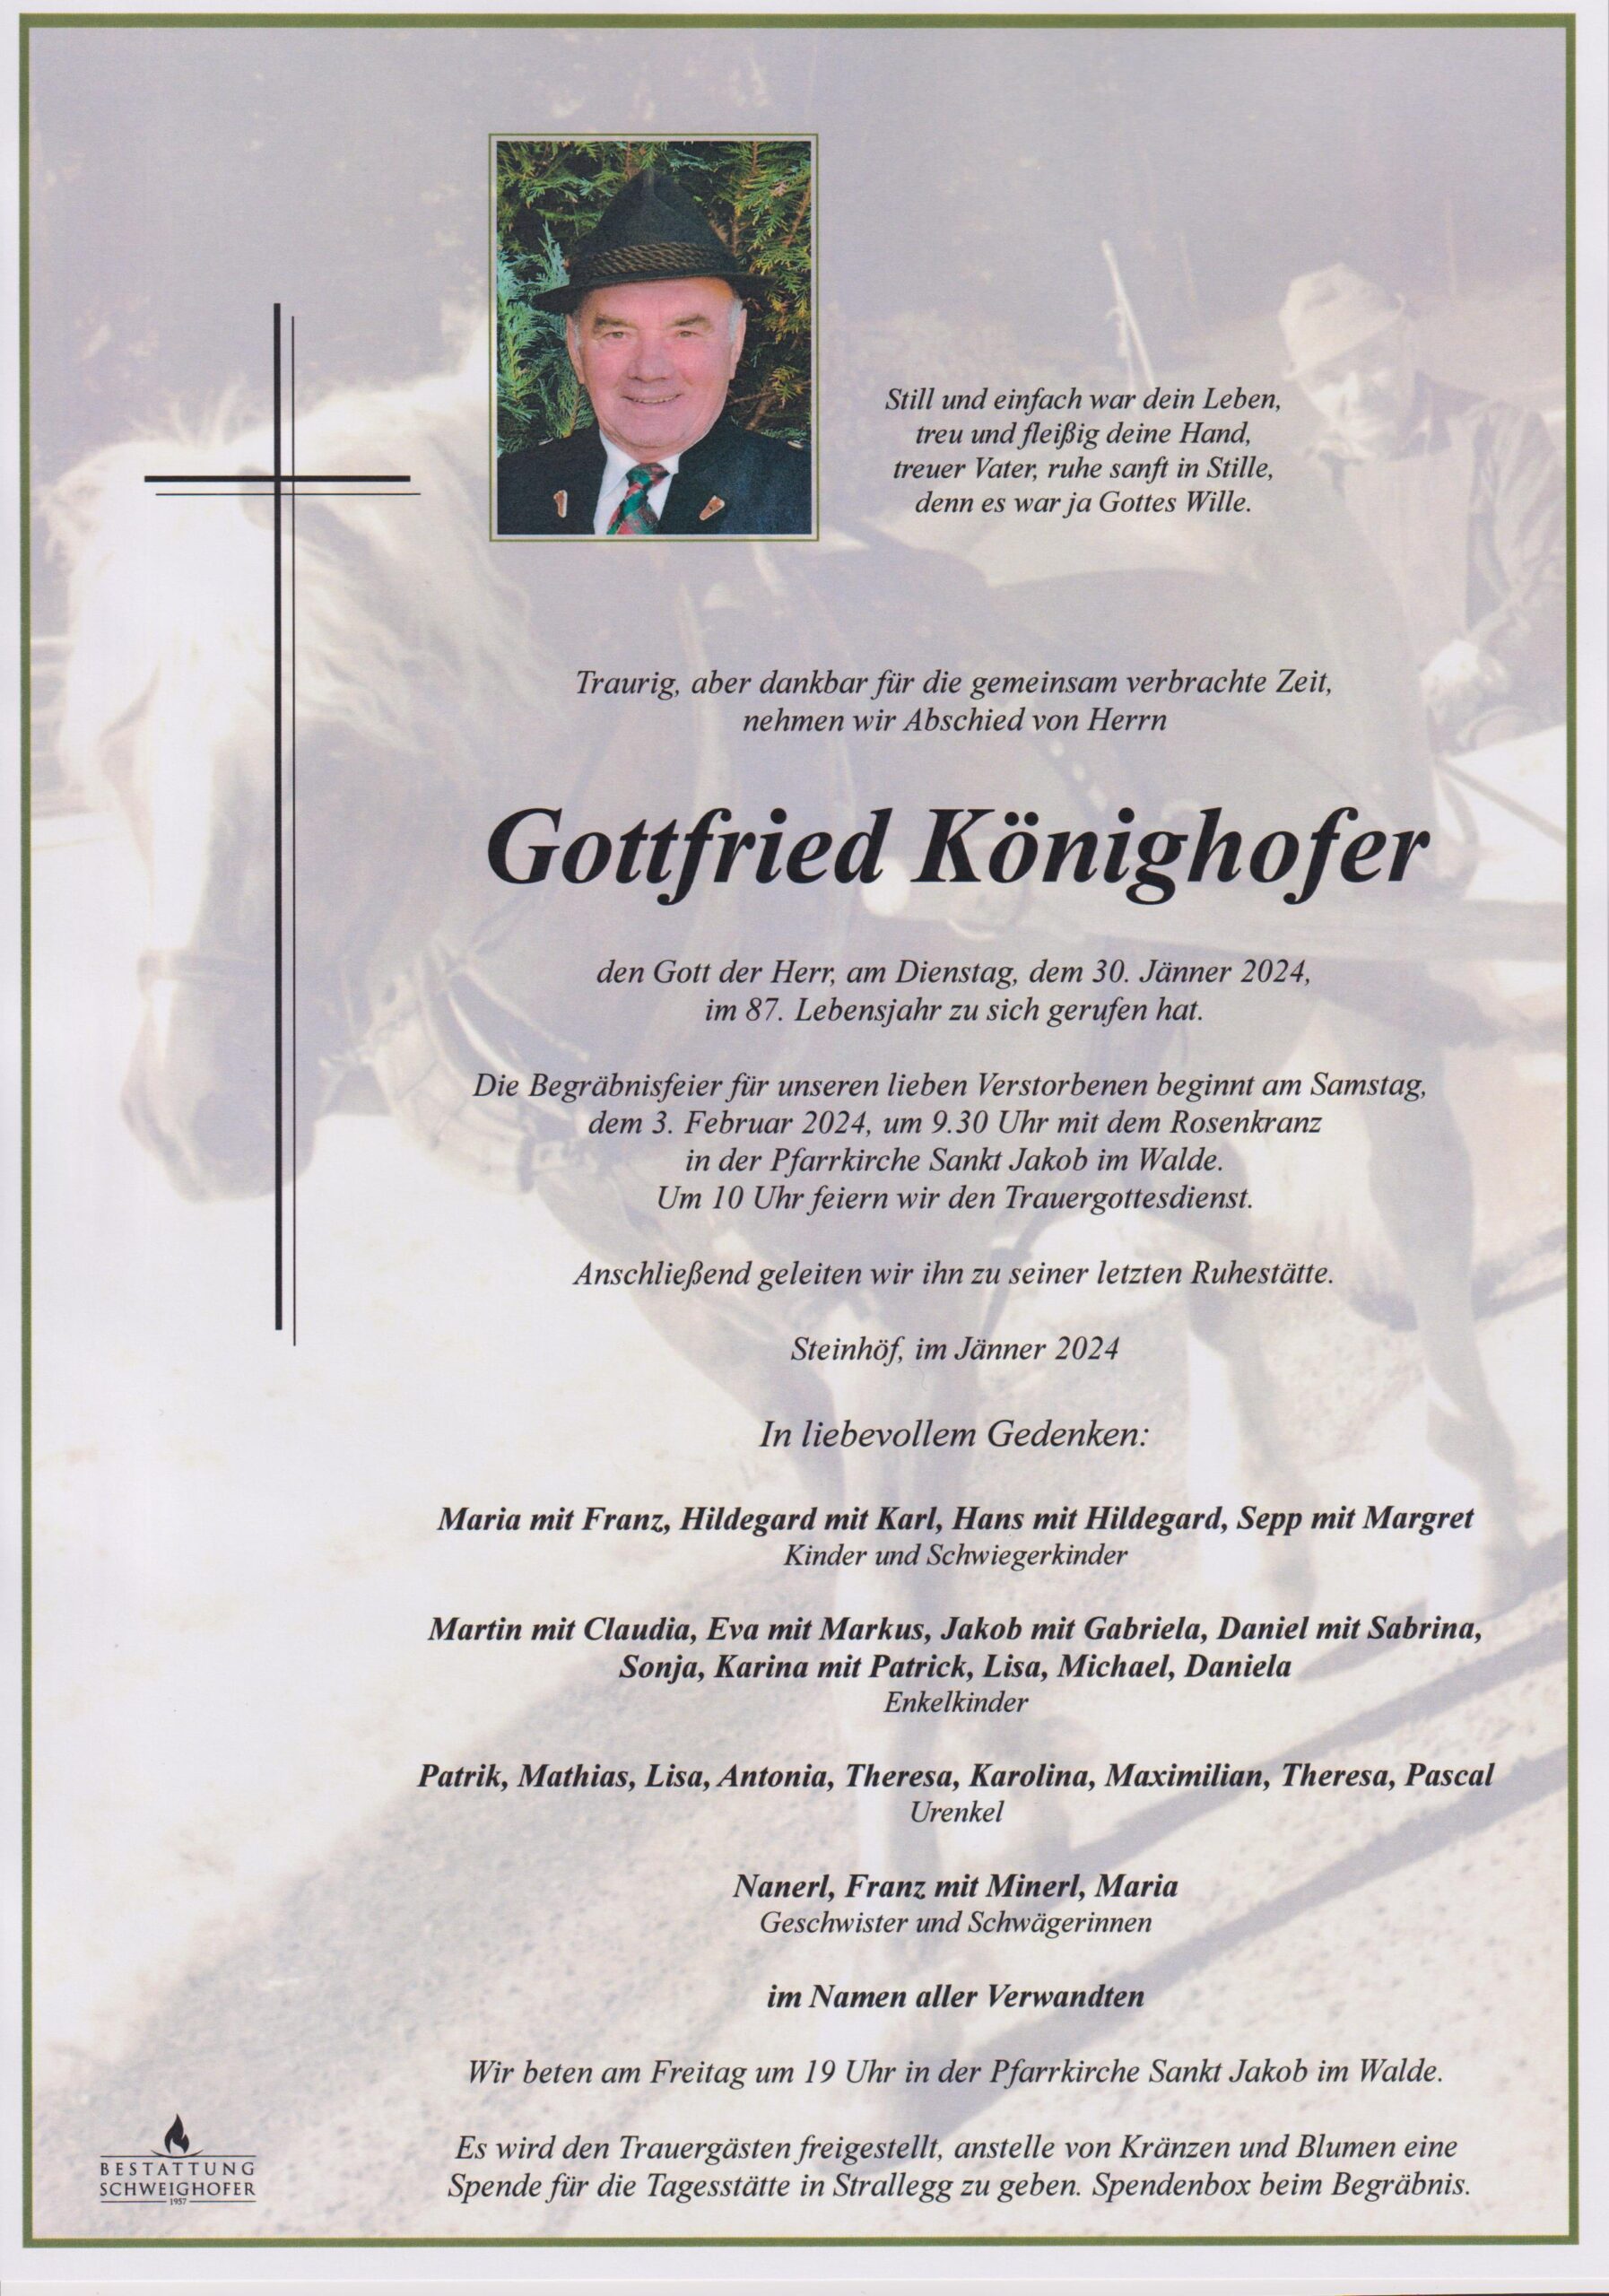 You are currently viewing Gottfried Könighofer